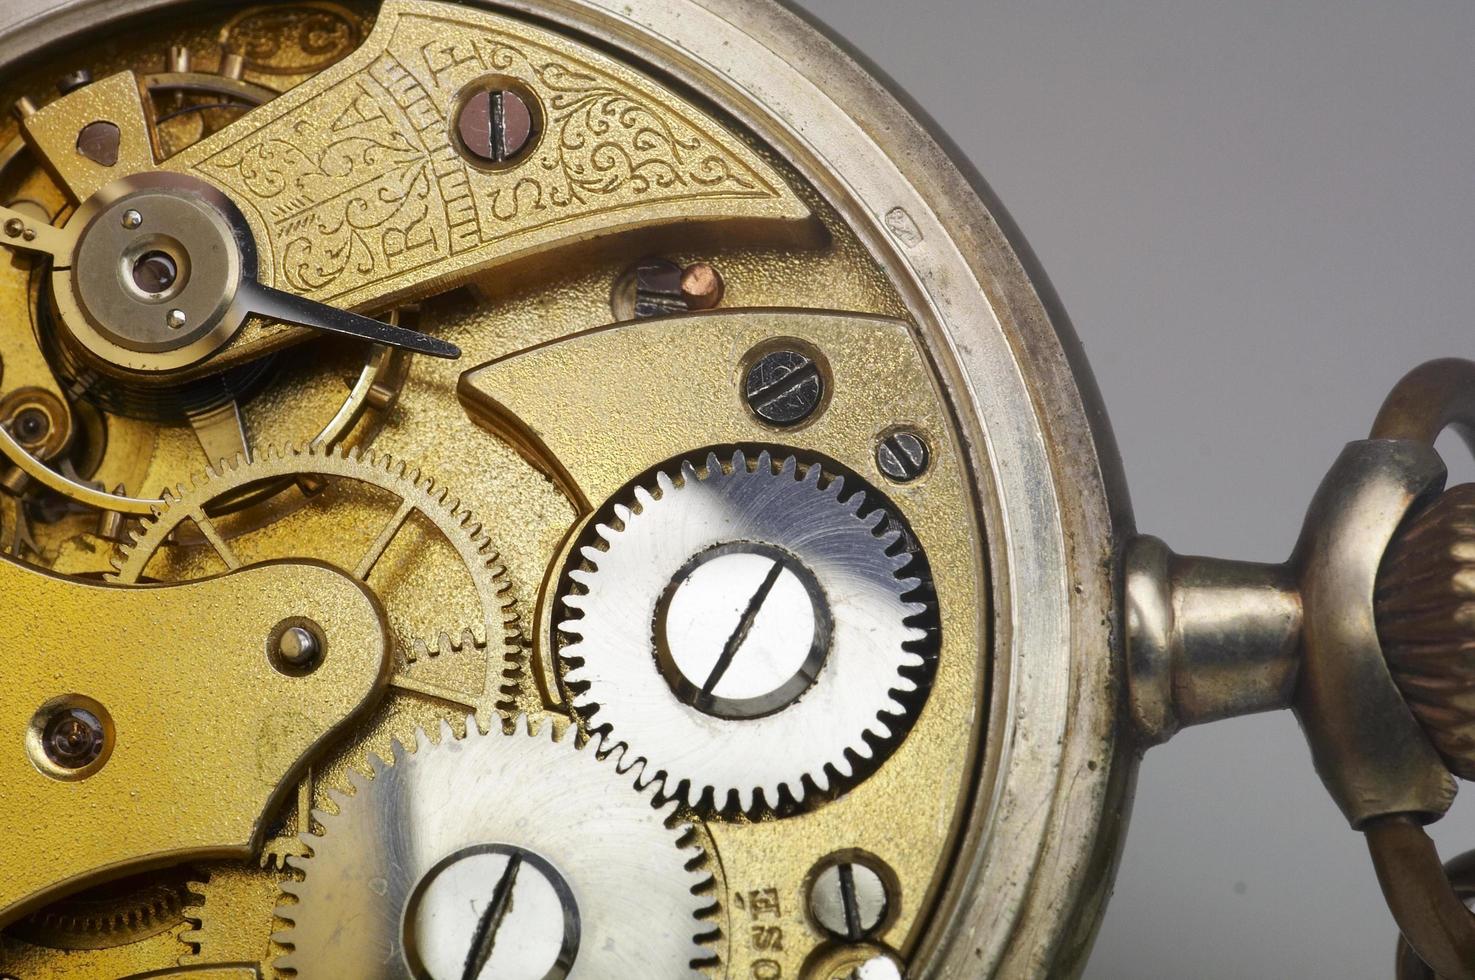 old pocket watch in details photo